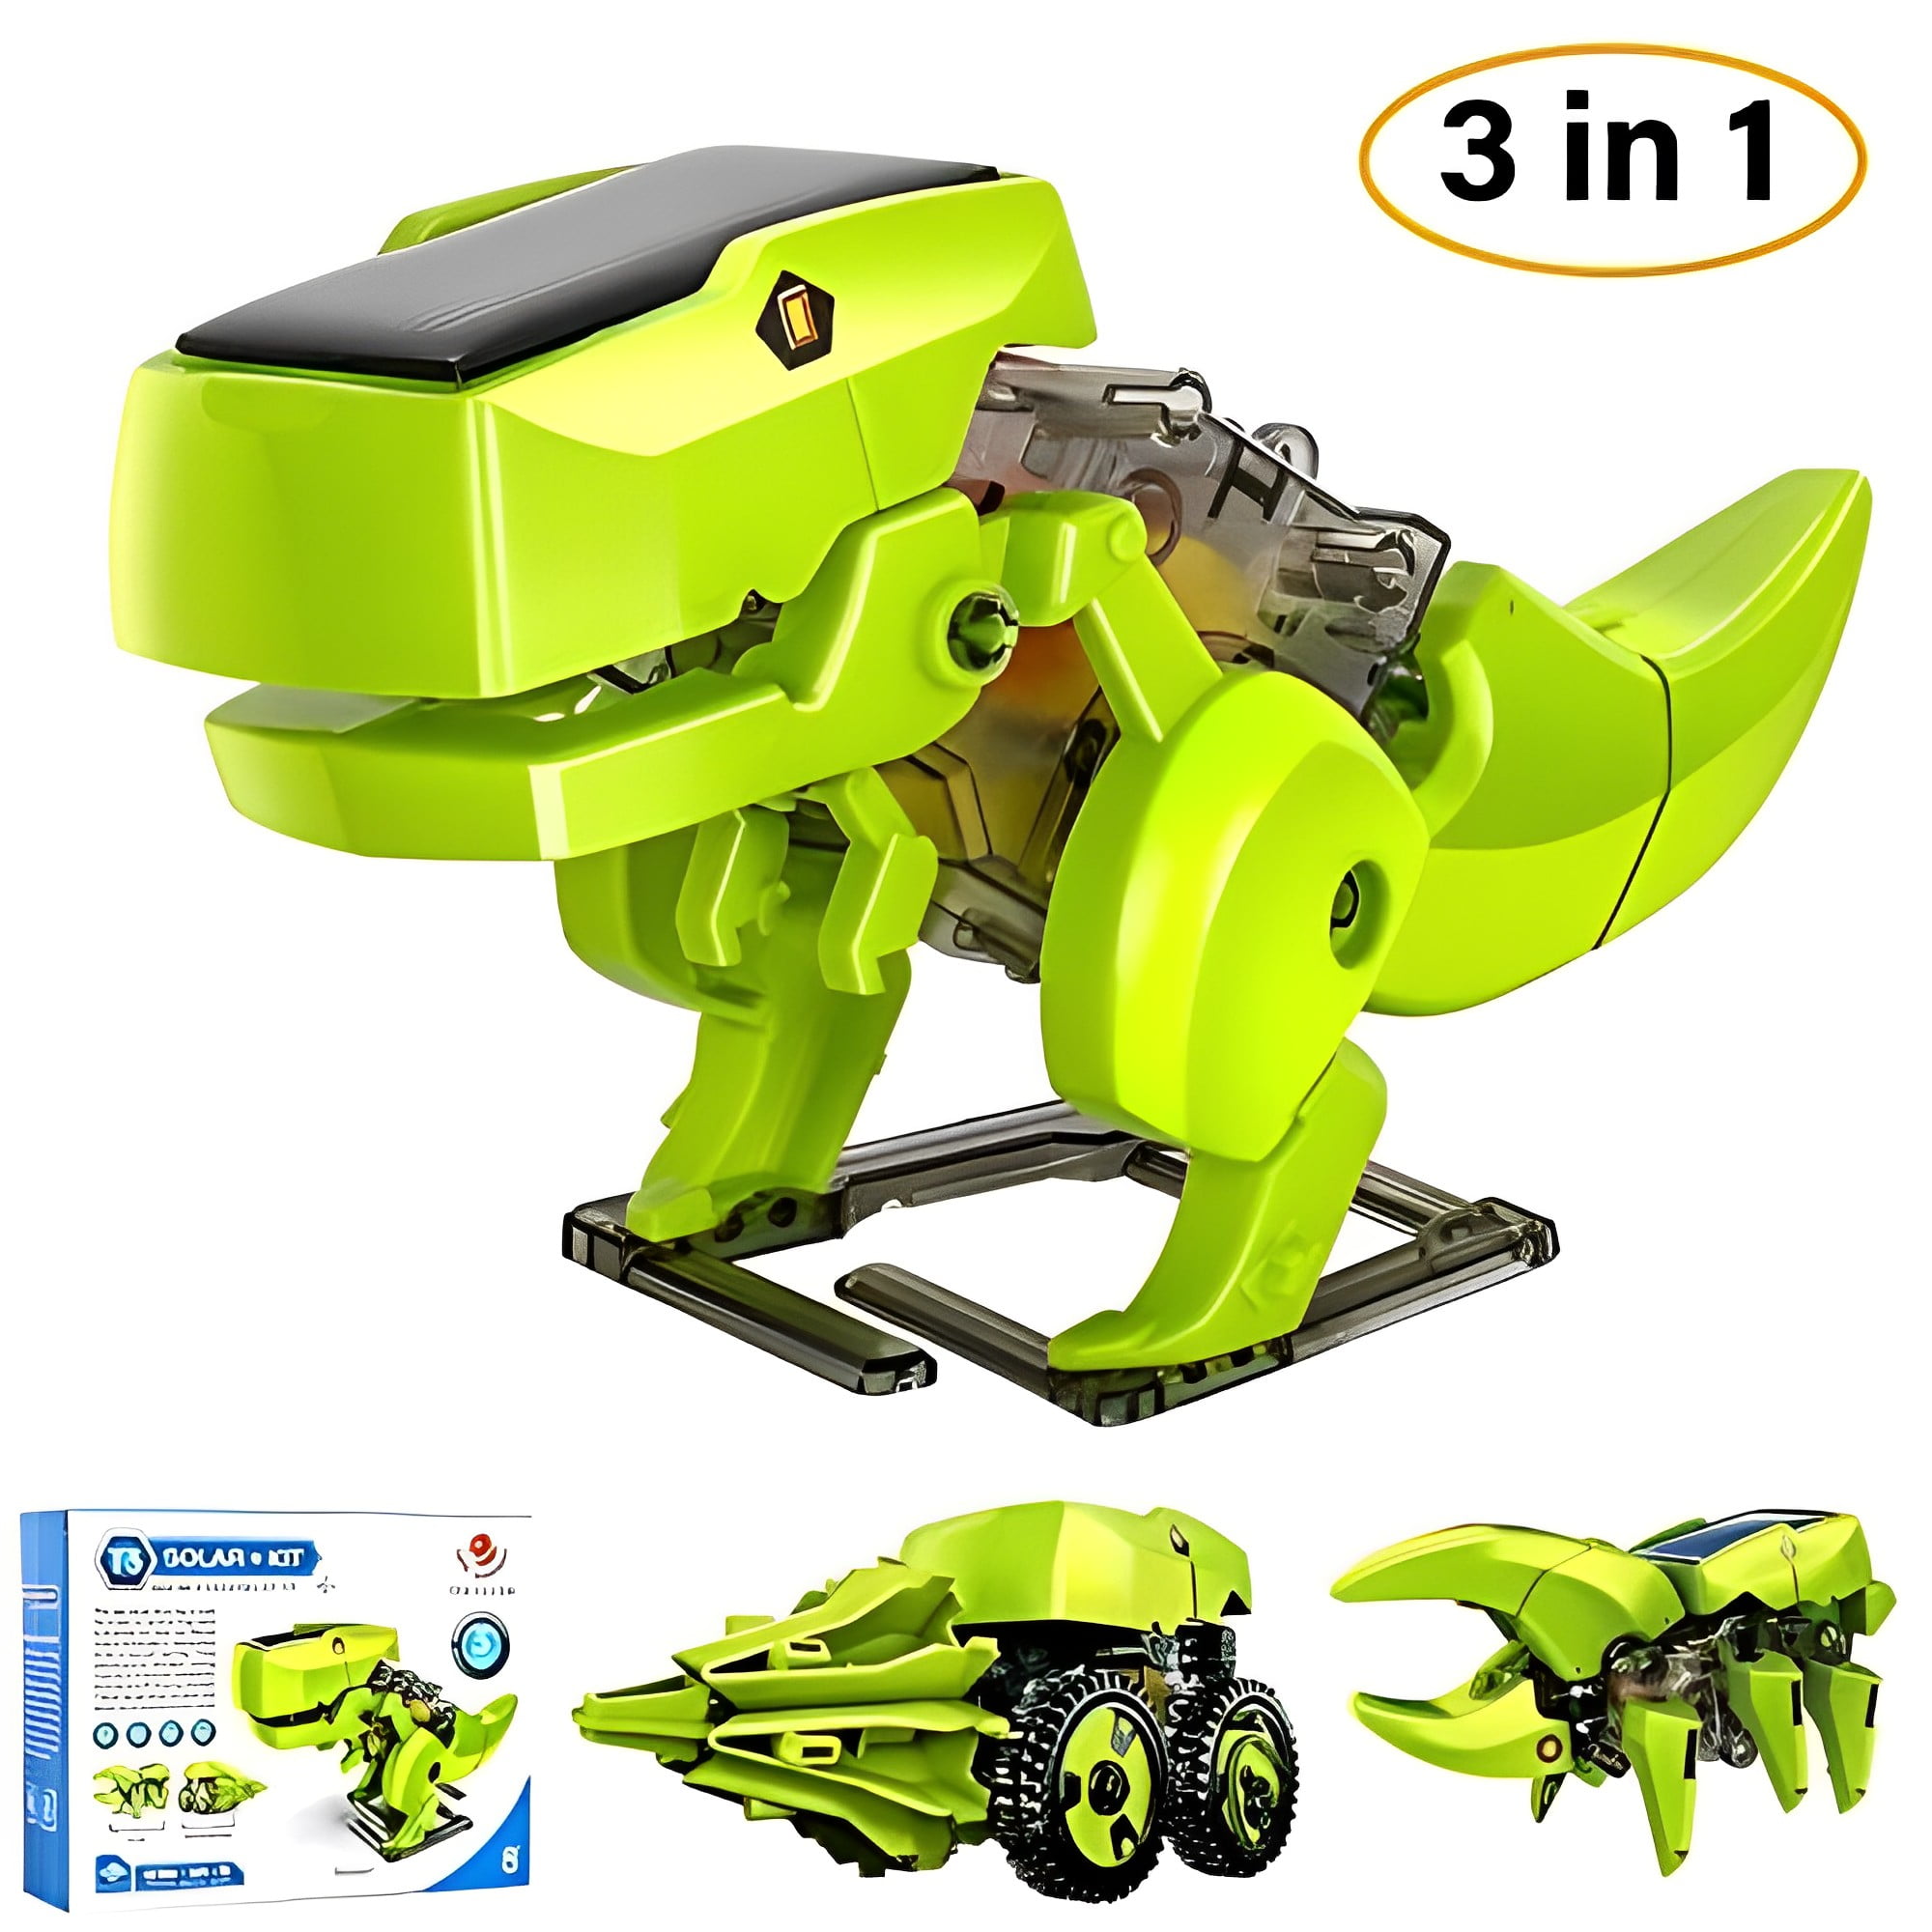 Spin Art Machine & Drawing Robot, DIY Spin & Paint Art Craft Kit, STEM DIY  Educational Science Experiment Model Kits, Toys for Ages 8-13, Gifts for  Boys and Girls 8 9 10 11 12 Years Old